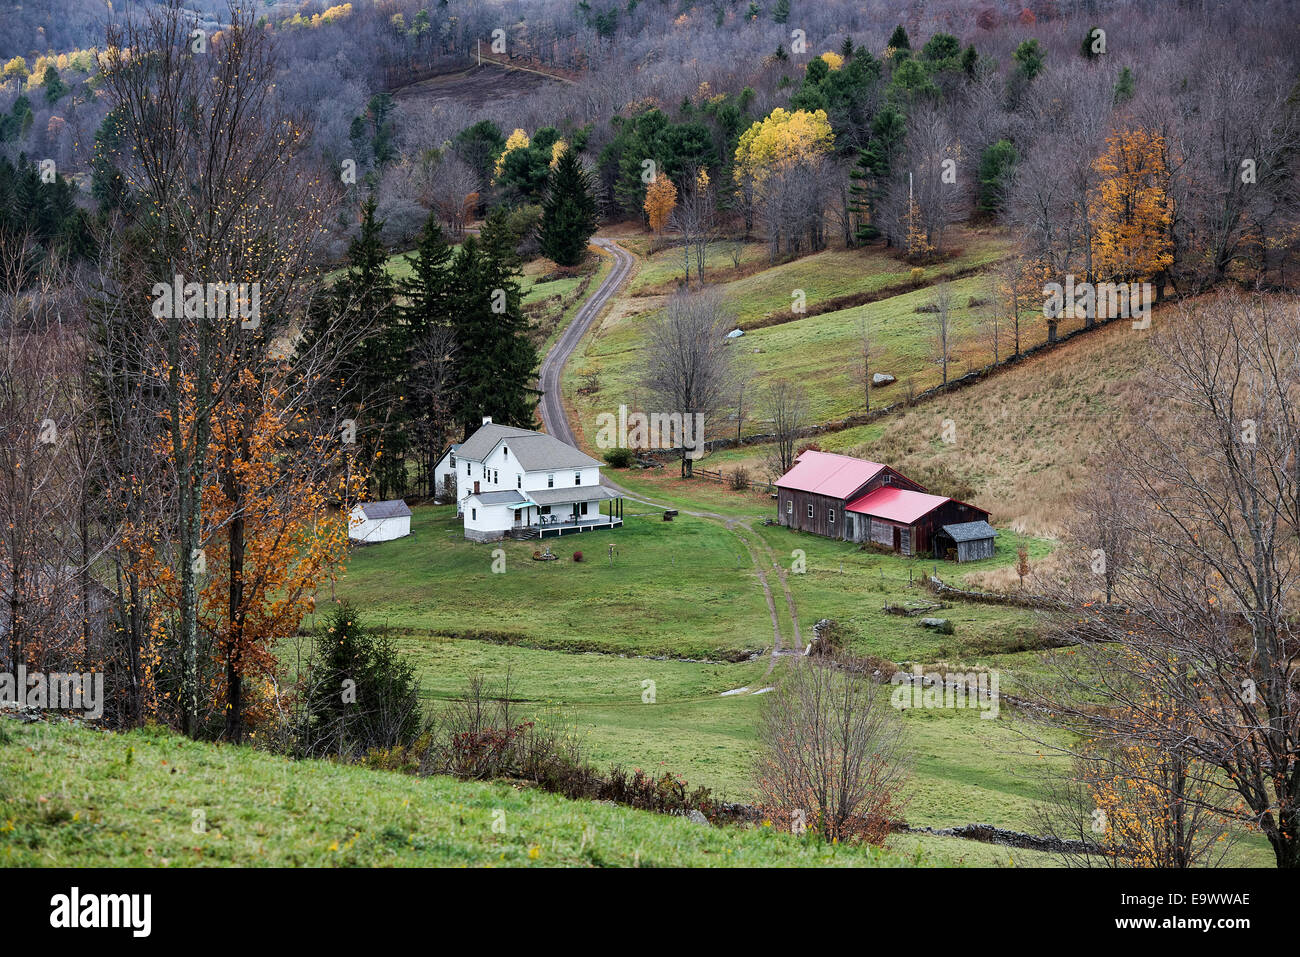 Rural house and scenic property, New York, USA Stock Photo